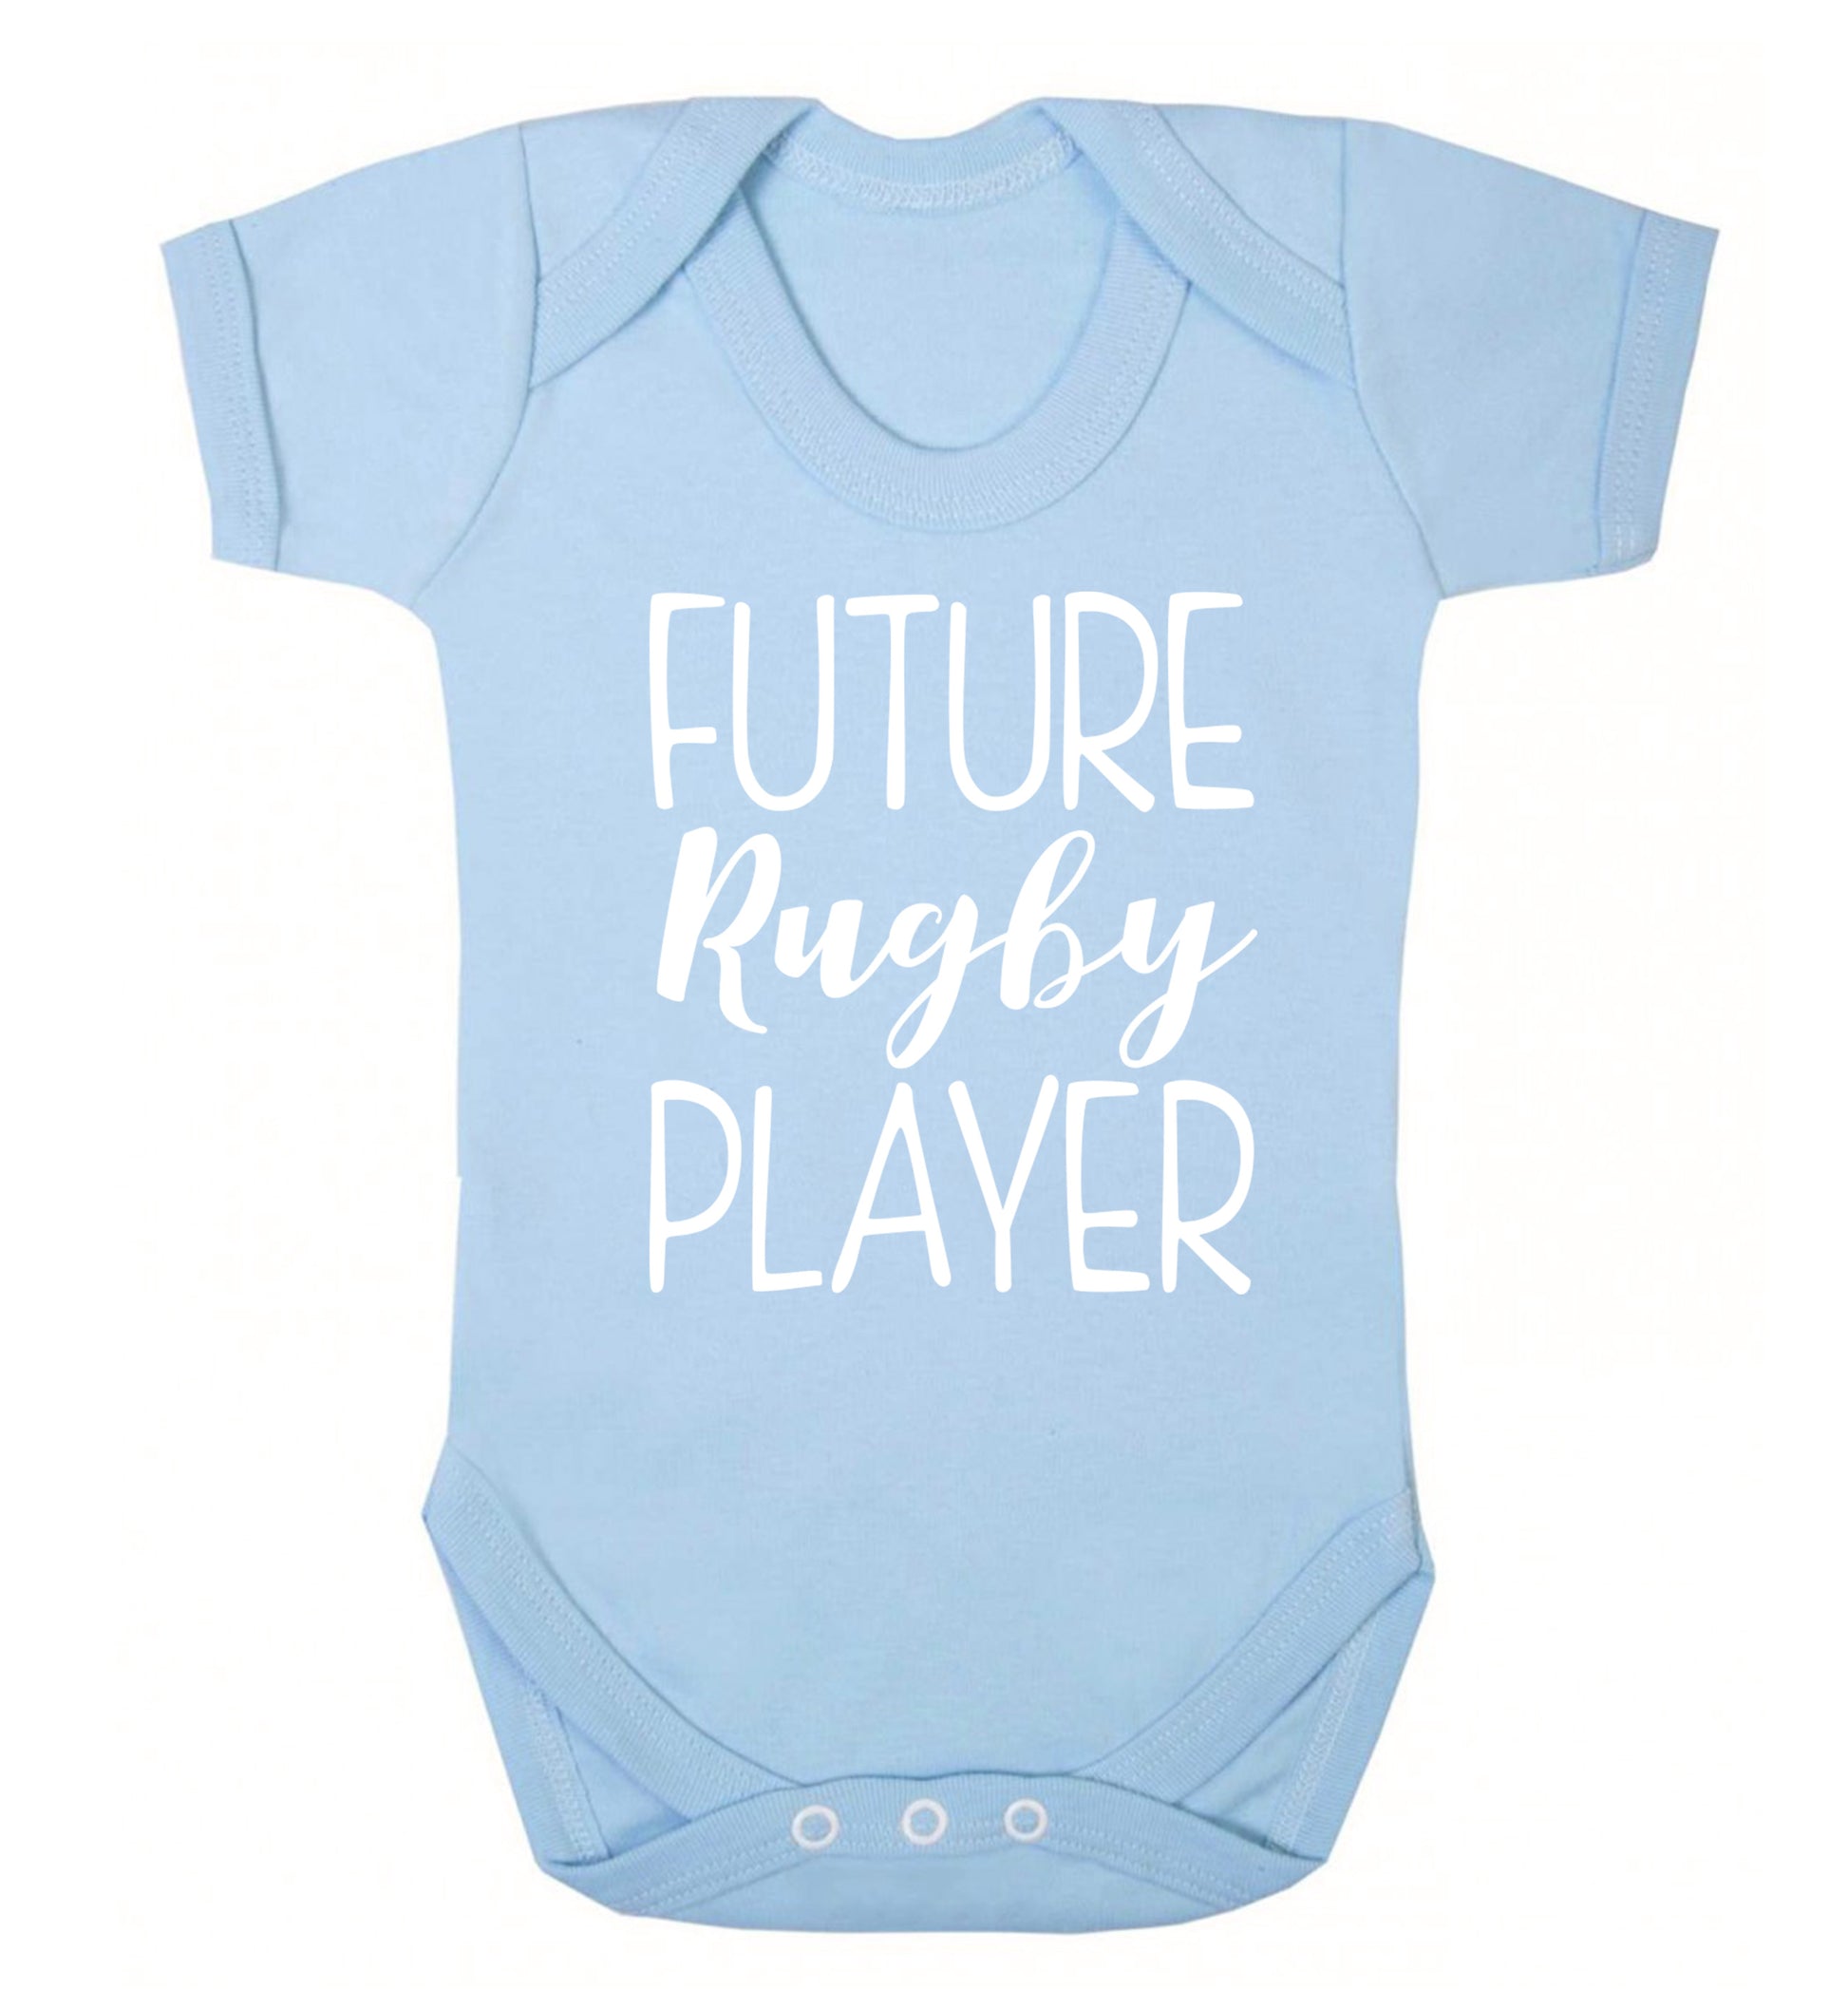 Future rugby player Baby Vest pale blue 18-24 months